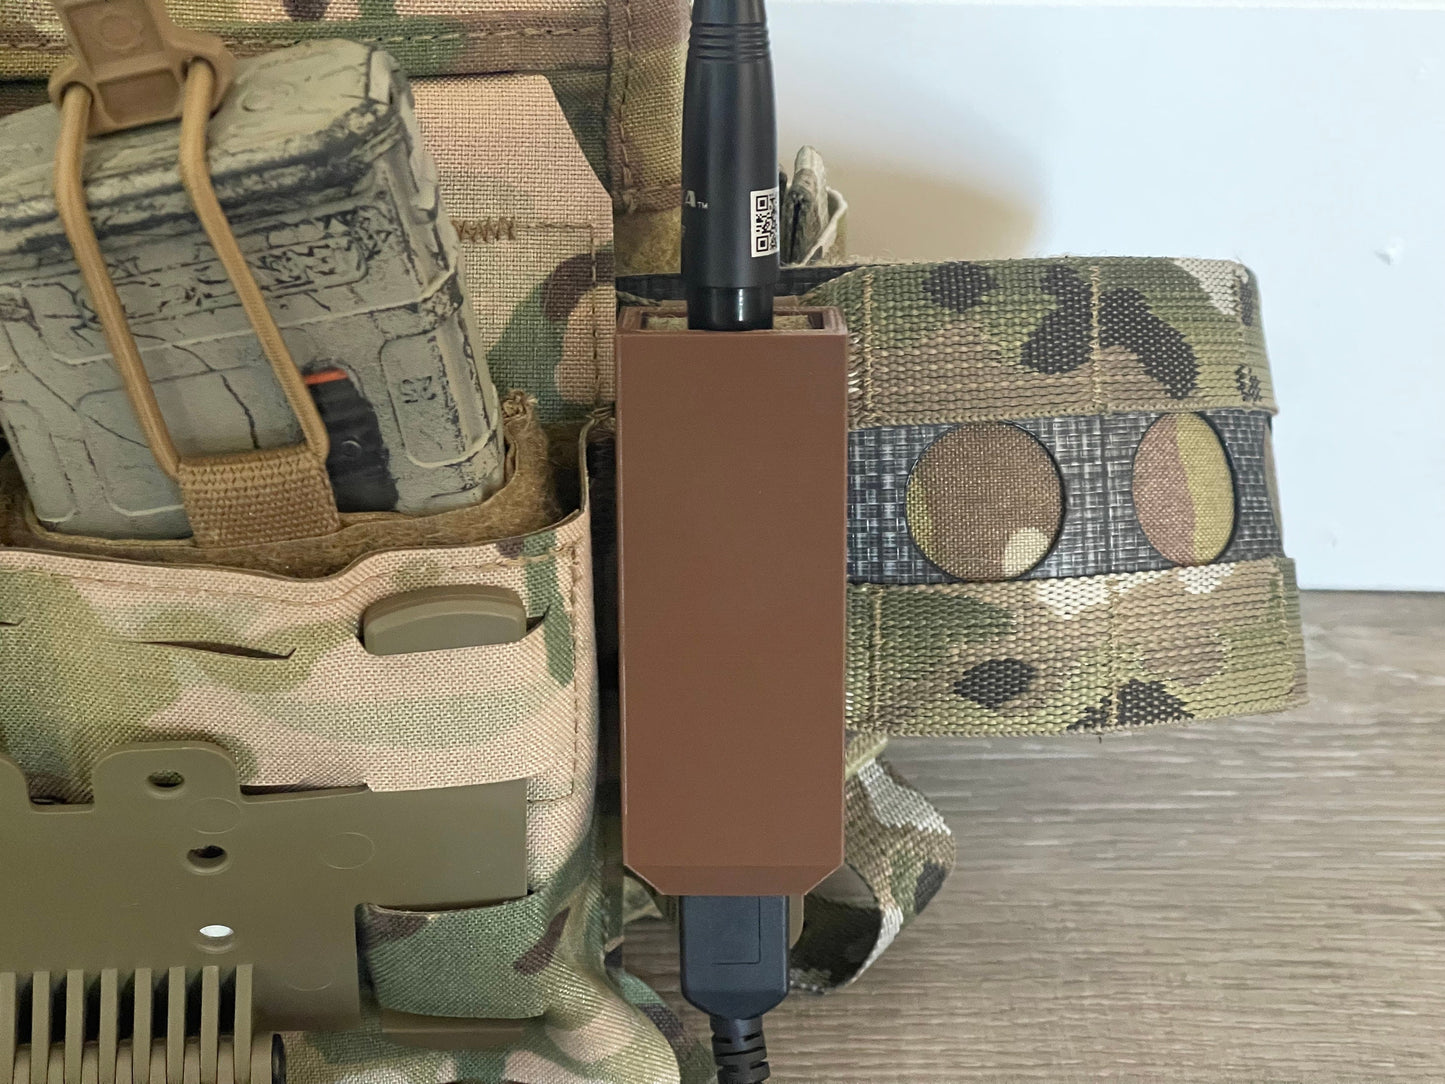 RTL-SDR MOLLE Pouch Case Mount Software Defined Radio Tactical